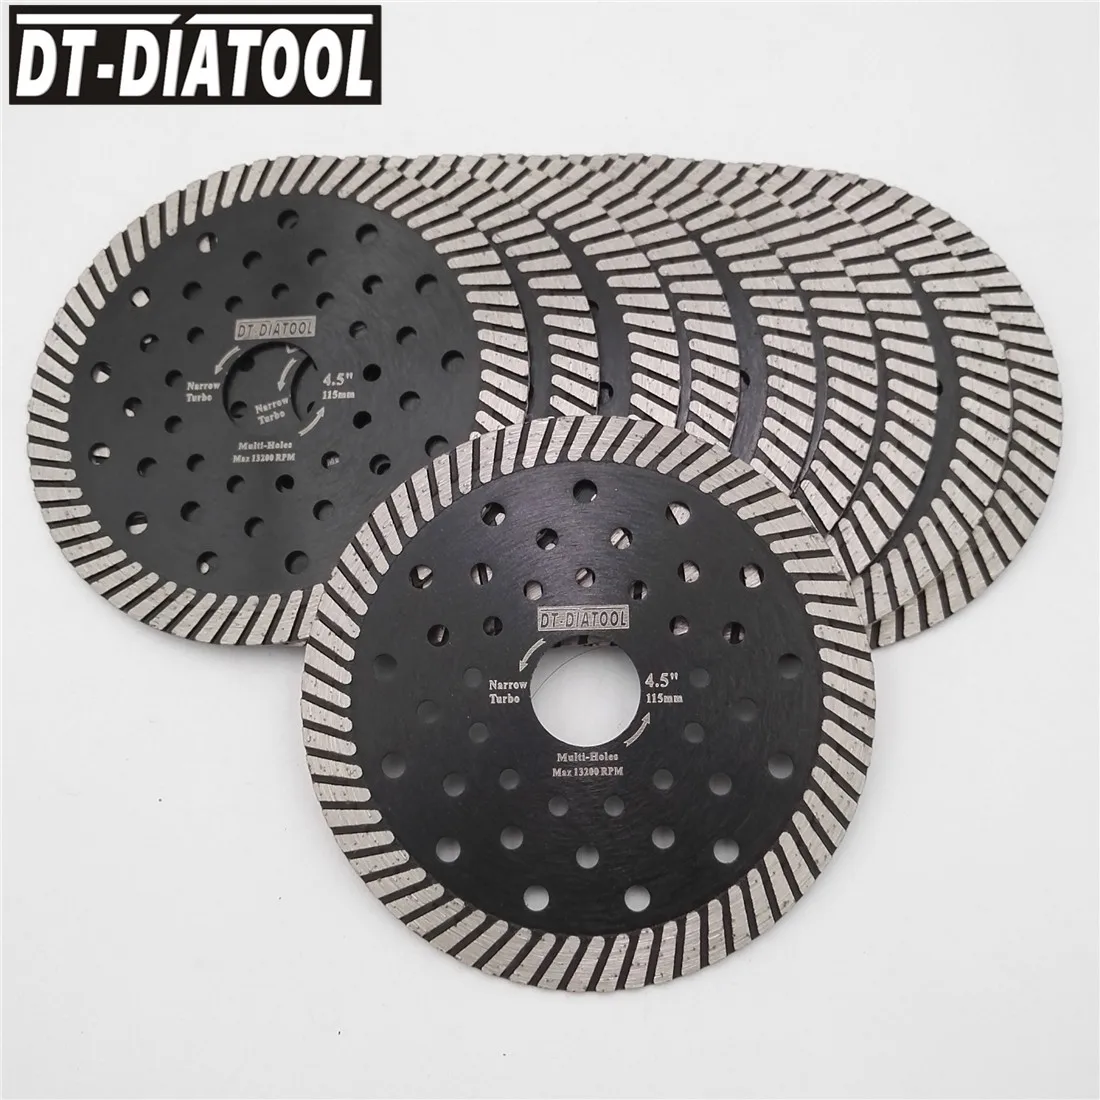 DT-DIATOOL 10pcs Dia 115mm/4.5 inch Diamond Hot Pressed Narrow Turbo Saw Blades For Granite Marble Cutting Disc With Multi Holes